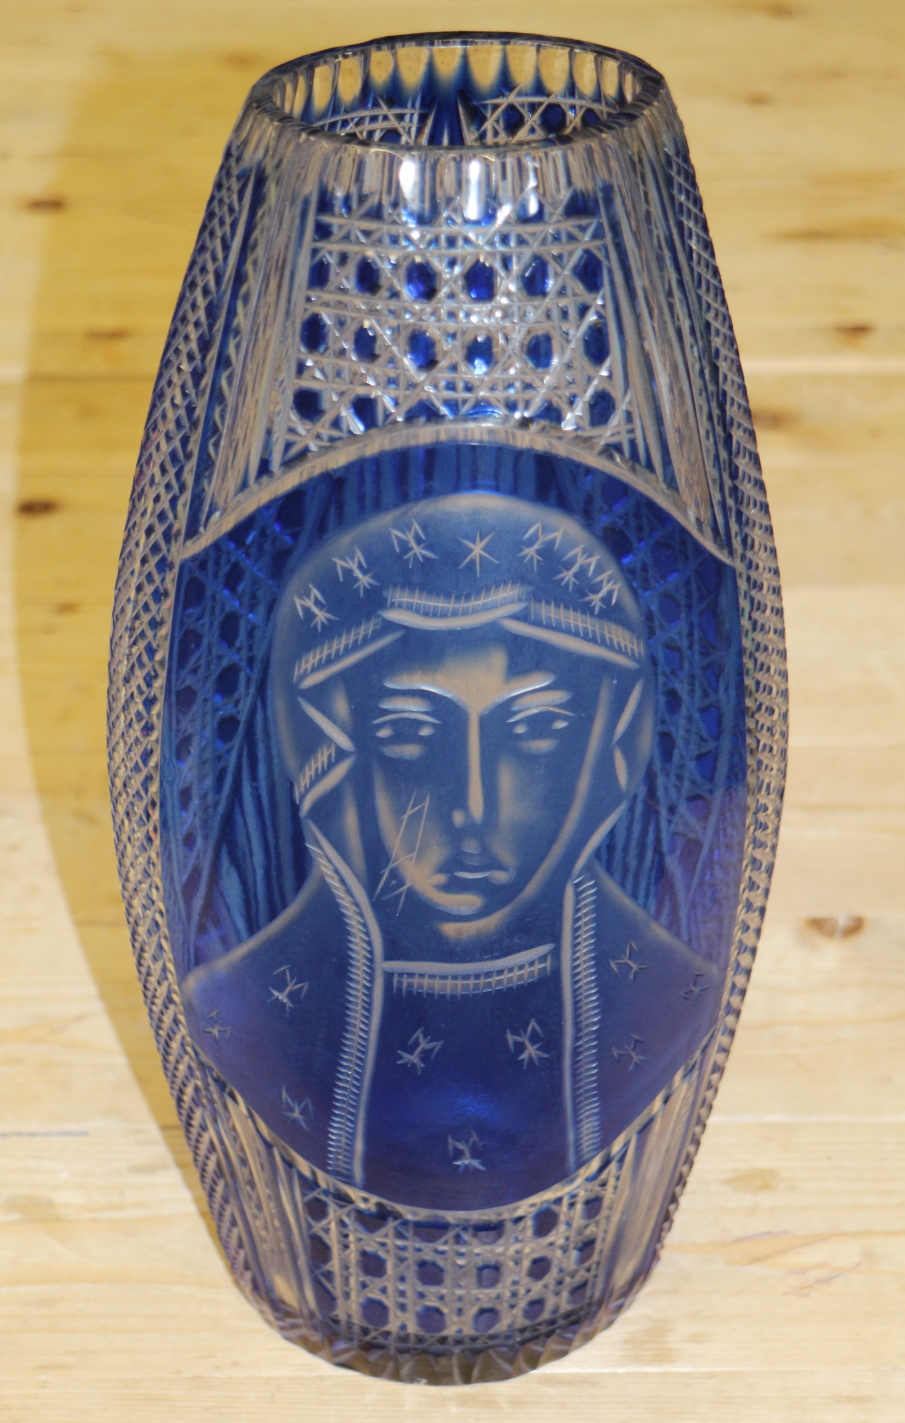 A 1950s blue overlaid cut and engraved glass vase with orthodox Madonna figure, 14 1/2" high